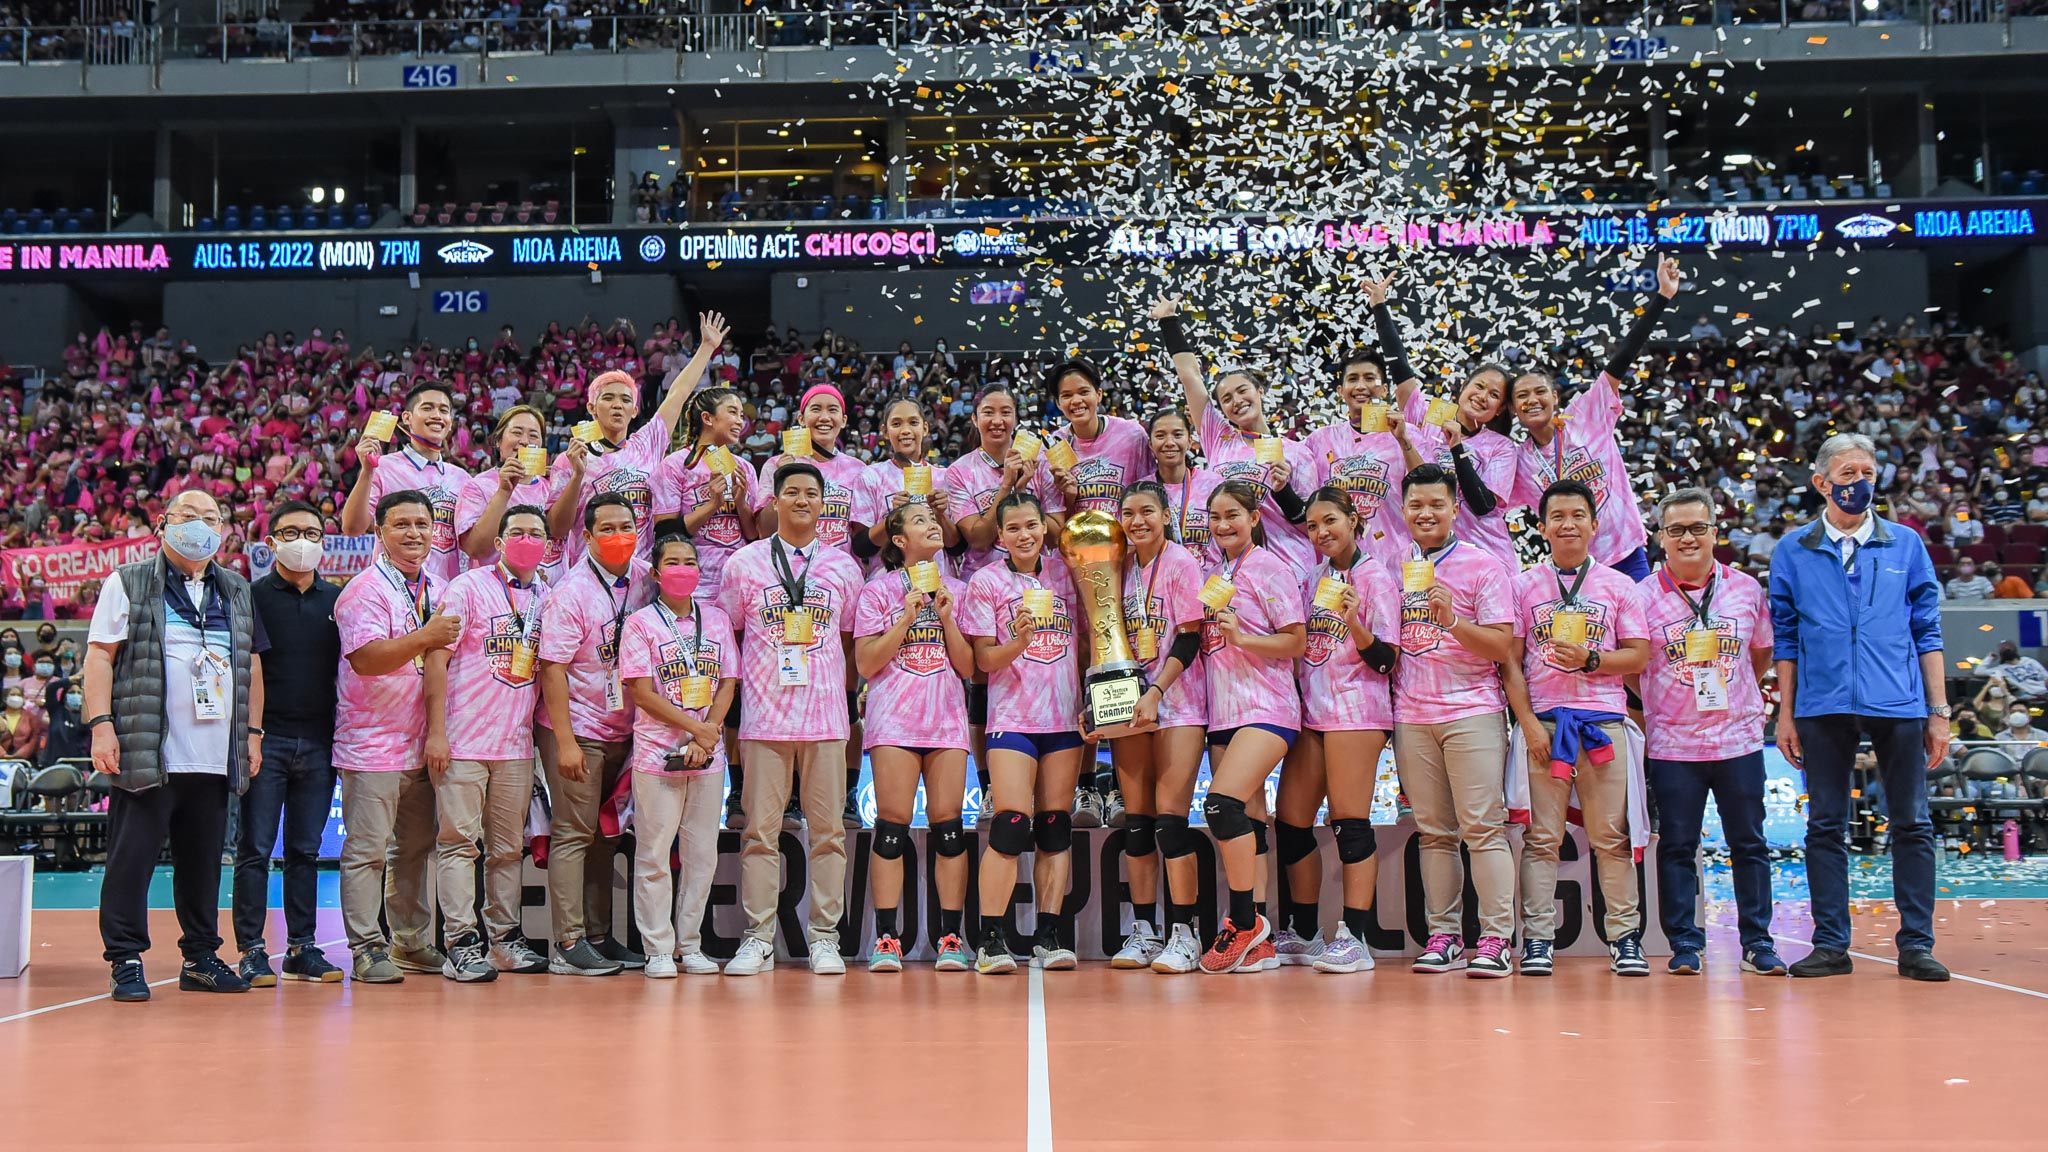 PVL-2022-Invitational-Creamline-vs.-Kingwhale-Finals-Champions-2 Creamline to represent PH in AVC Cup 2022 AVC Cup for Women News PVL Volleyball  - philippine sports news